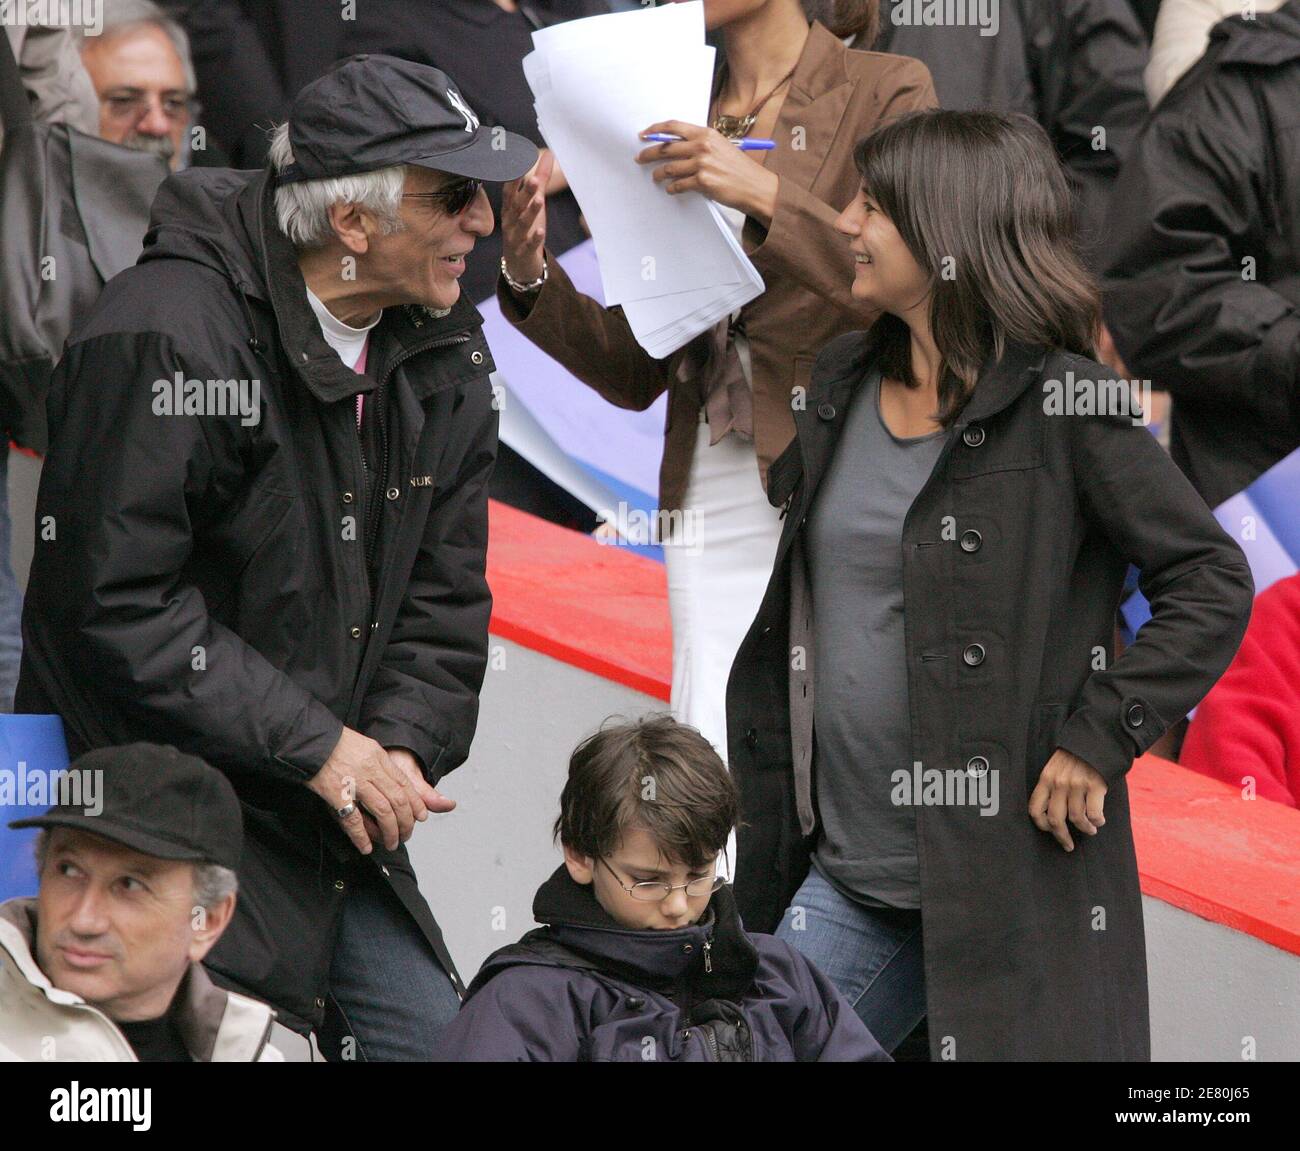 French actor Gerard Darmon and Estelle Denis attend the French Championship , PSG vs Olympic Lyonnais at the Parc des Princes stadium in Paris, France, on May 5, 2007. The game ended in a draw 1-1. Photo by Gouhier-Taamallah/Cameleon/ABACAPRESS.COM Stock Photo